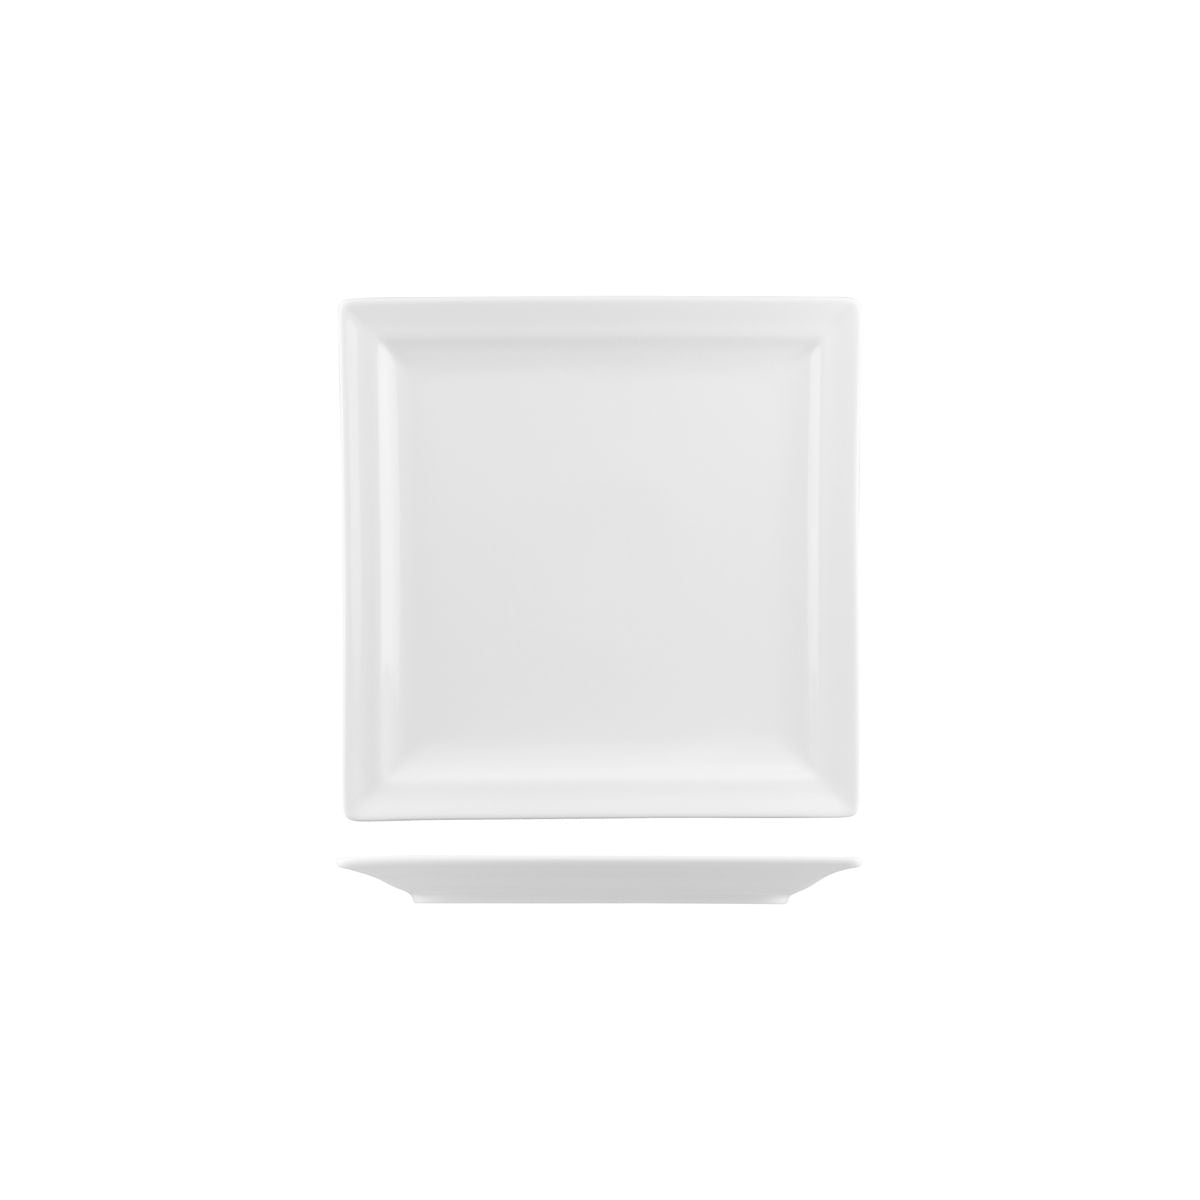 Classic Gourmet Square Plate 240mm: Pack of 12